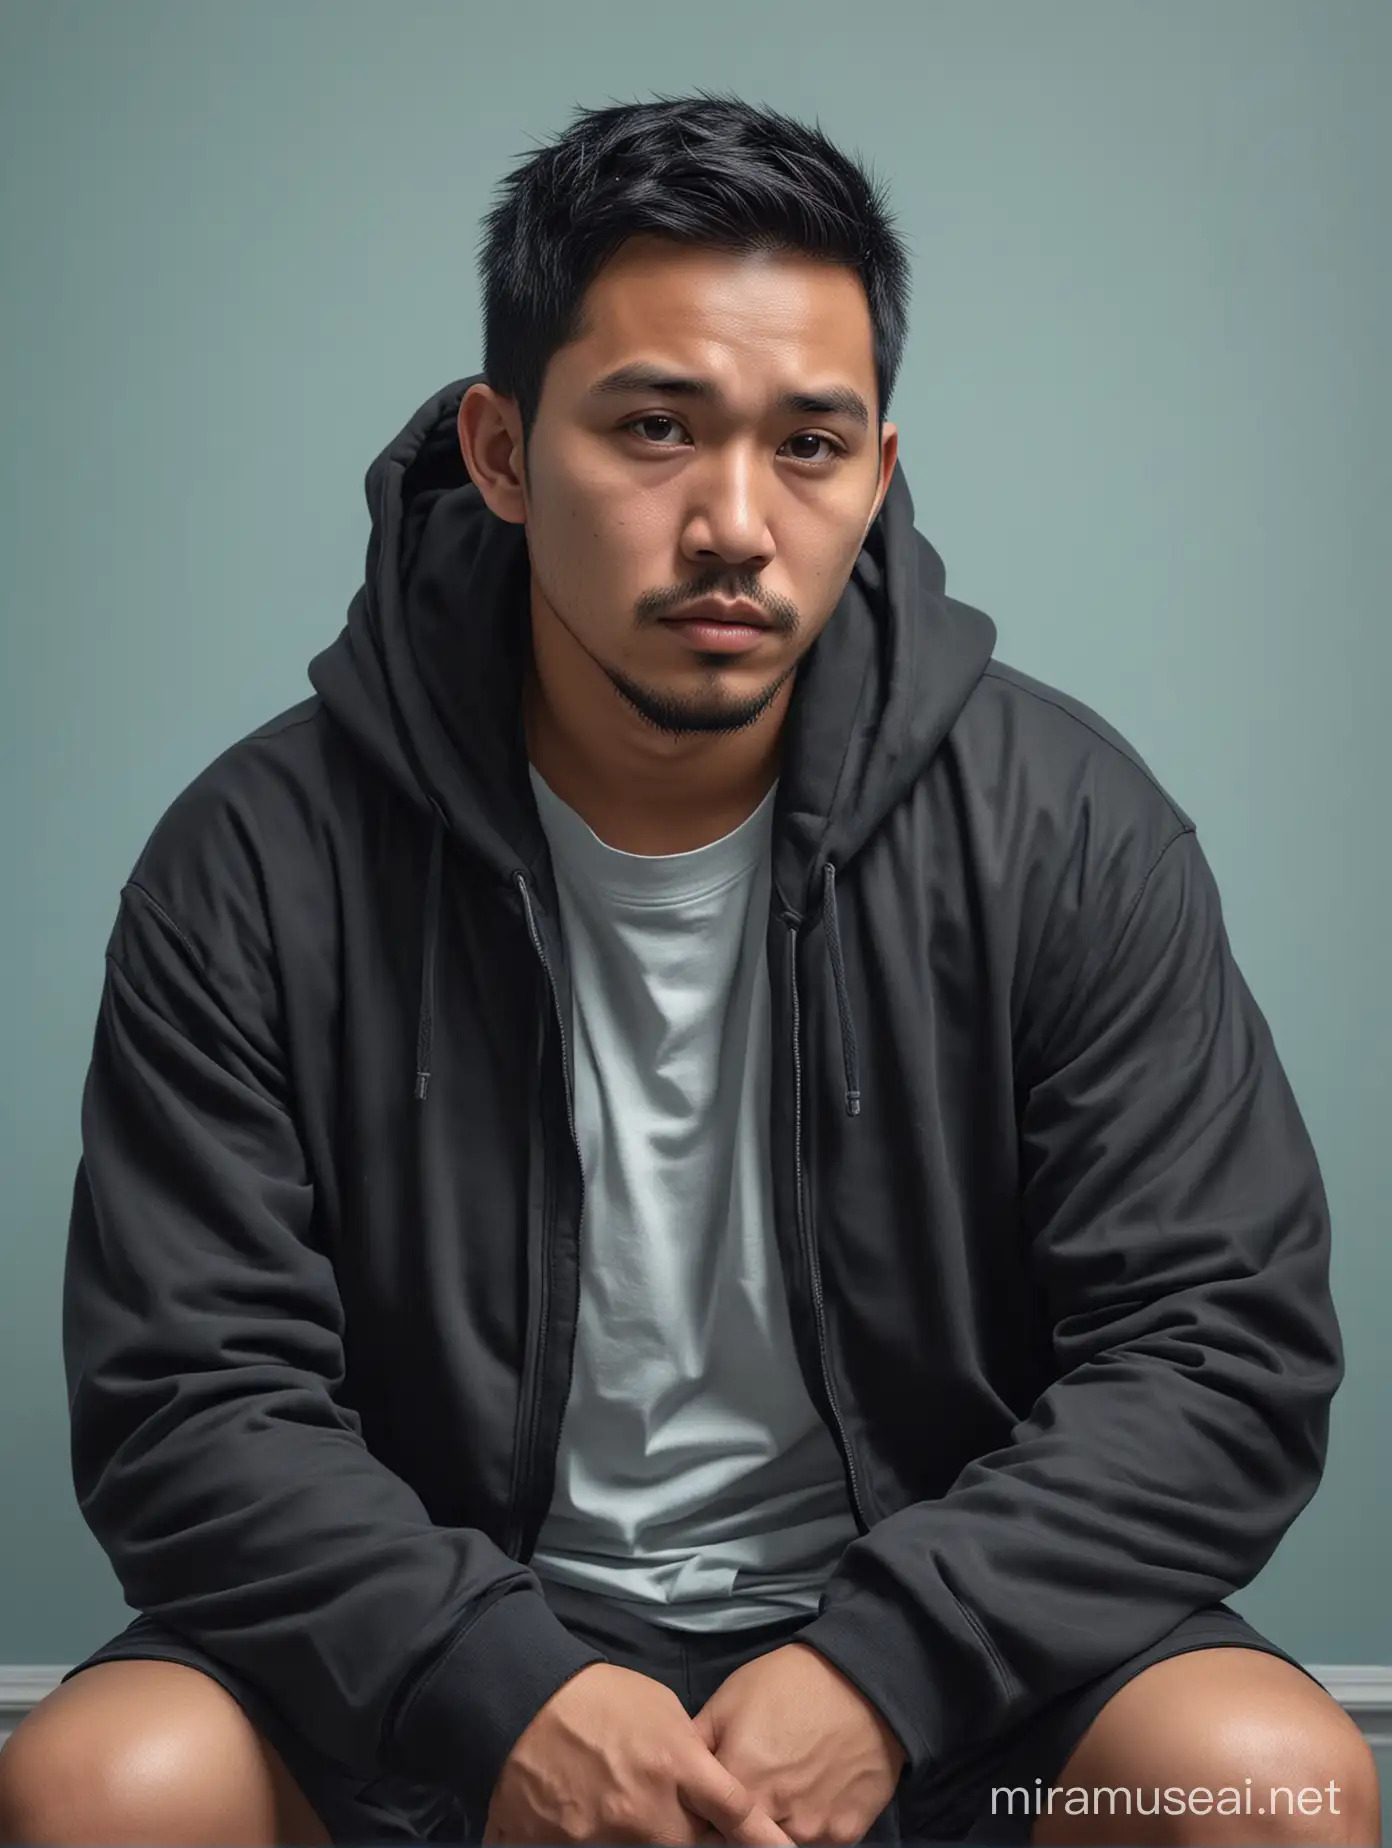 Contemplative Indonesian Man in Black Hoodie Sitting in a Blue Room